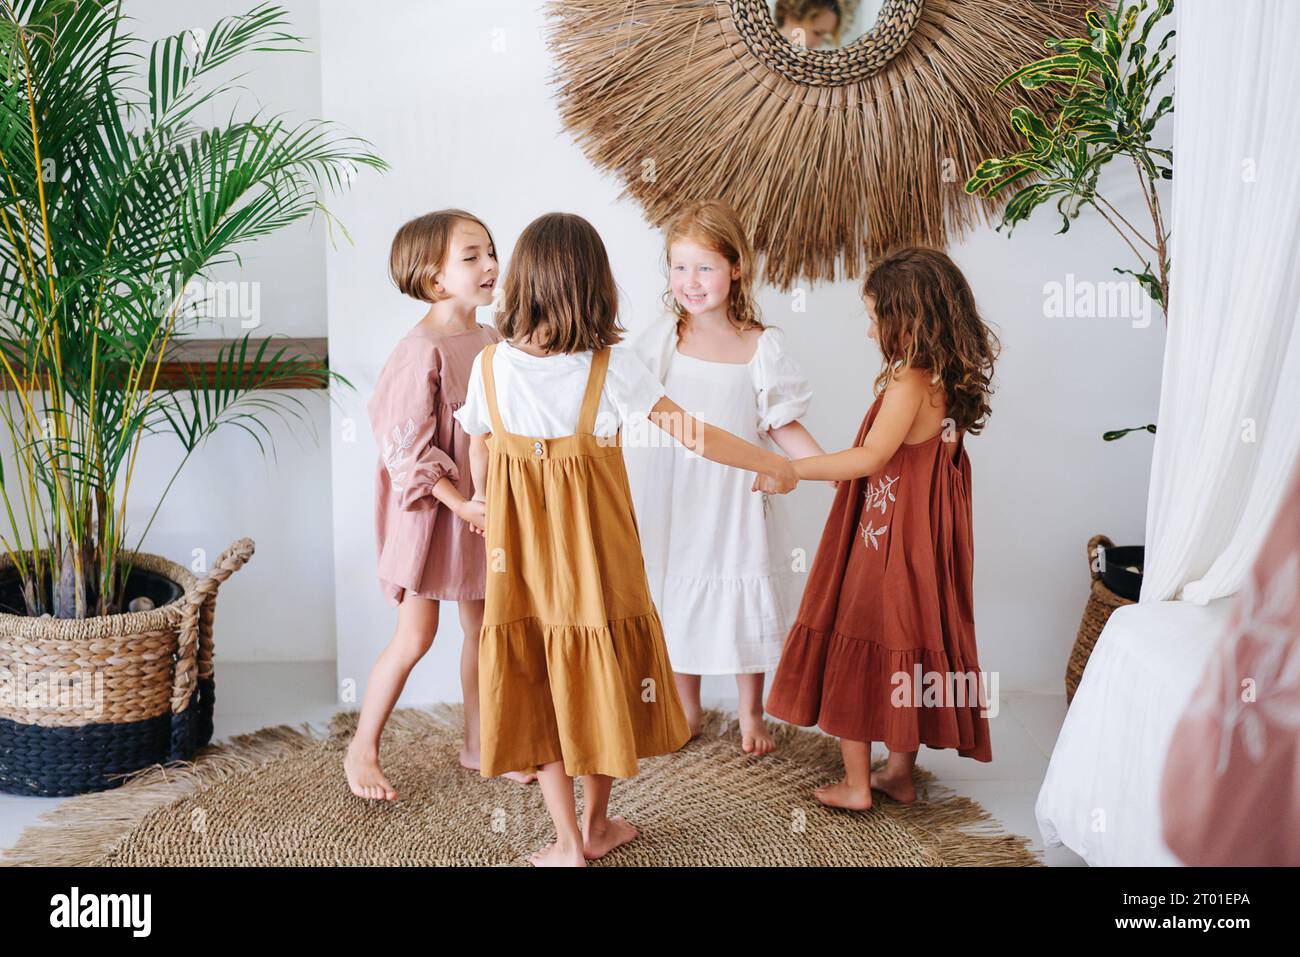 Four children girls had a party, joyfully twirling holding hands Stock Photo